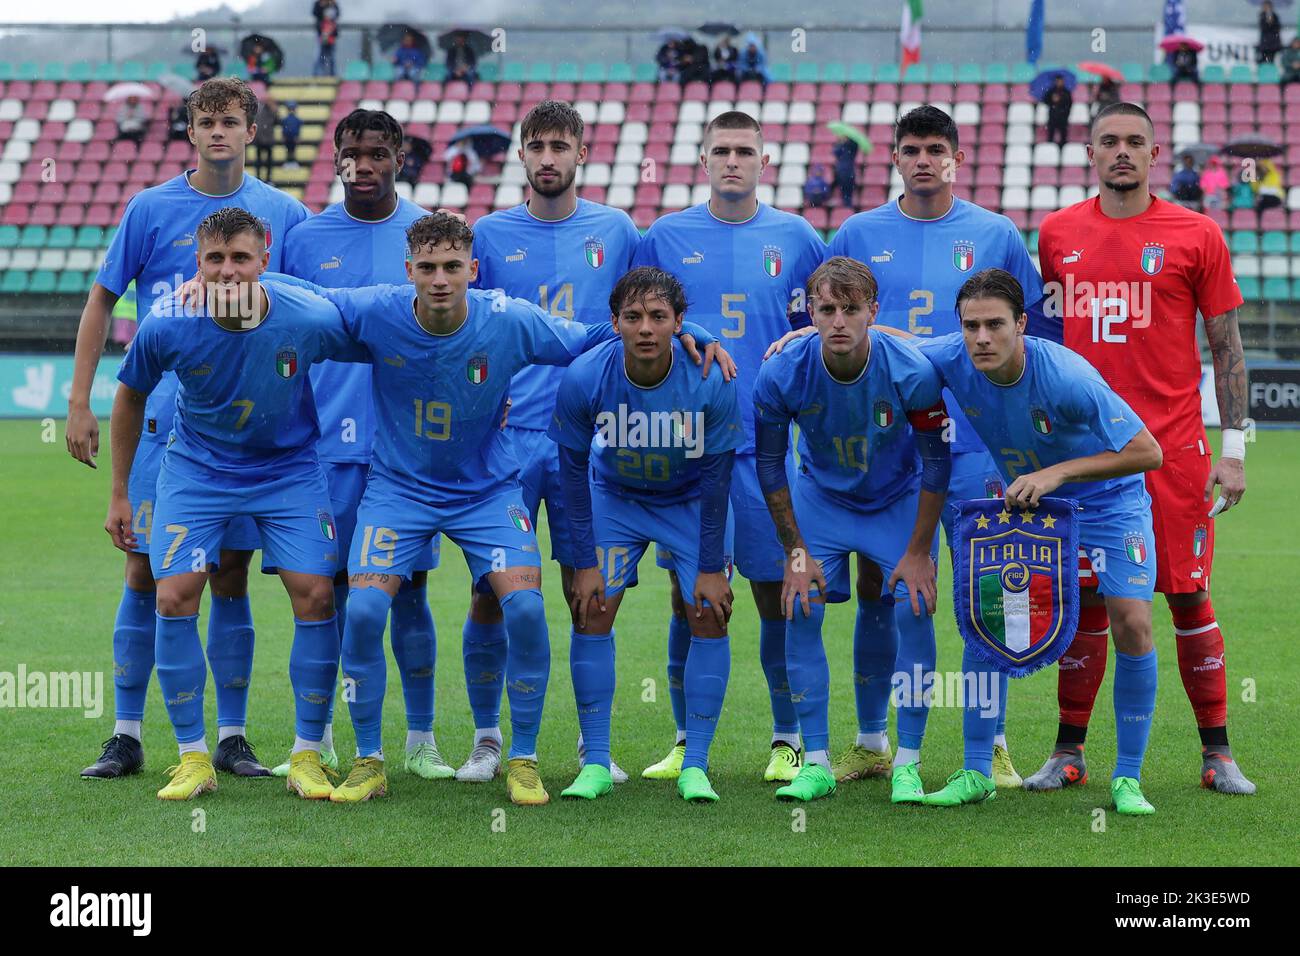 Castel Di Sangro, Italy. 26th Sep, 2022. Italy players pose for a team photo during the friendly football match between Italy U21 and Japan U21 at Teofilo Patini stadium in Castel di Sangro (Italy), September 26th, 2022. Photo Cesare Purini/Insidefoto Credit: Insidefoto di andrea staccioli/Alamy Live News Stock Photo